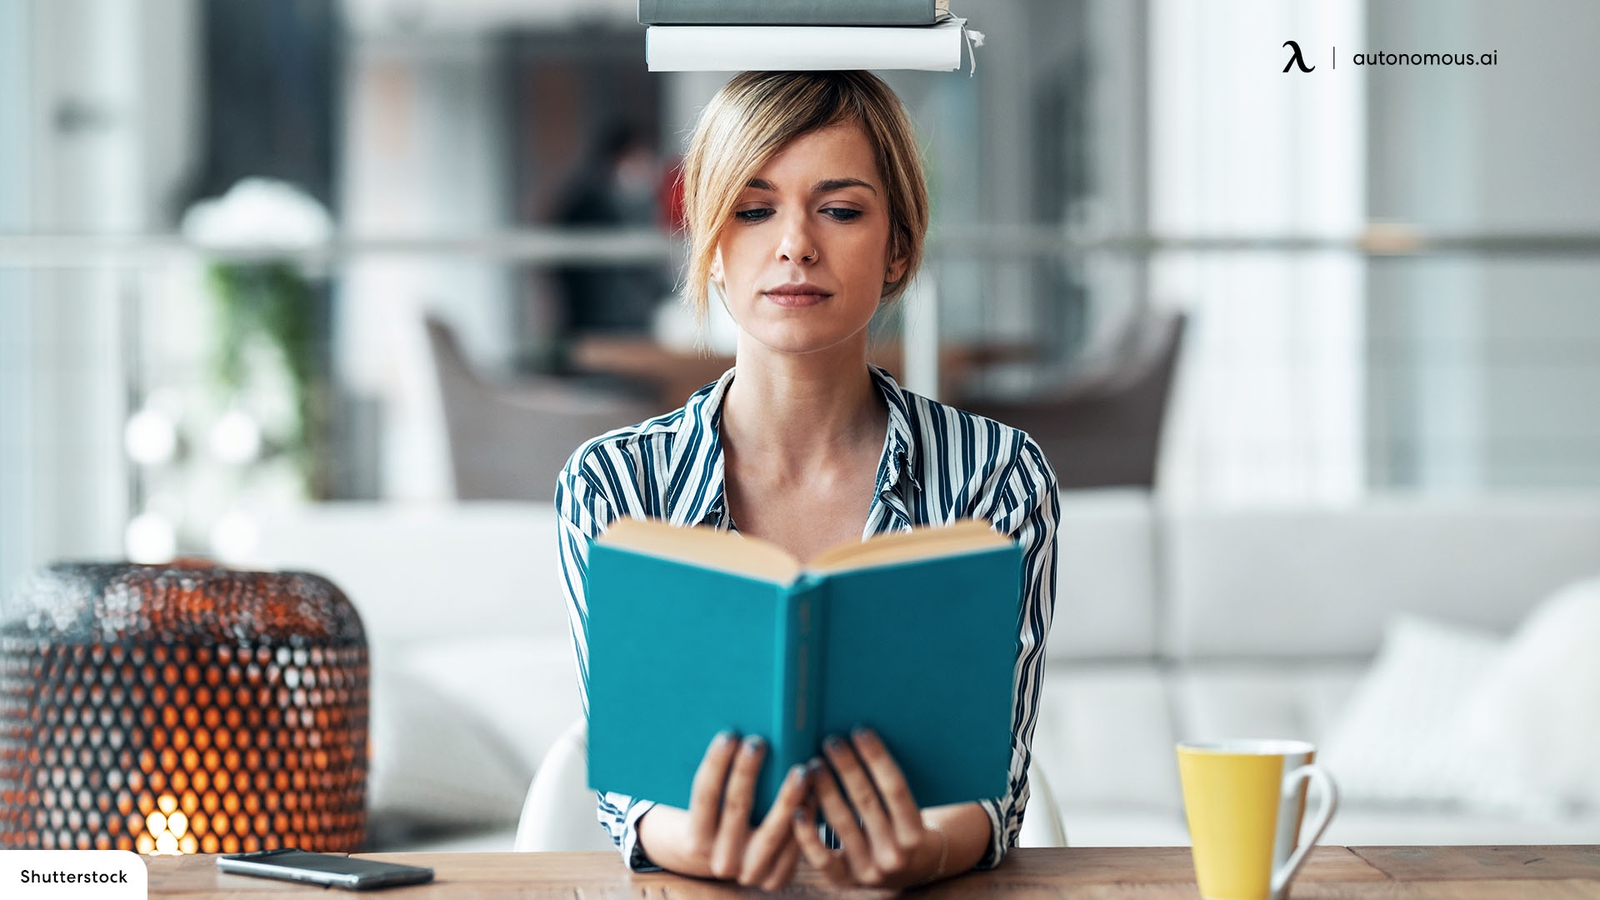 Have You Ever Practiced an Ergonomic Reading Position Yet?